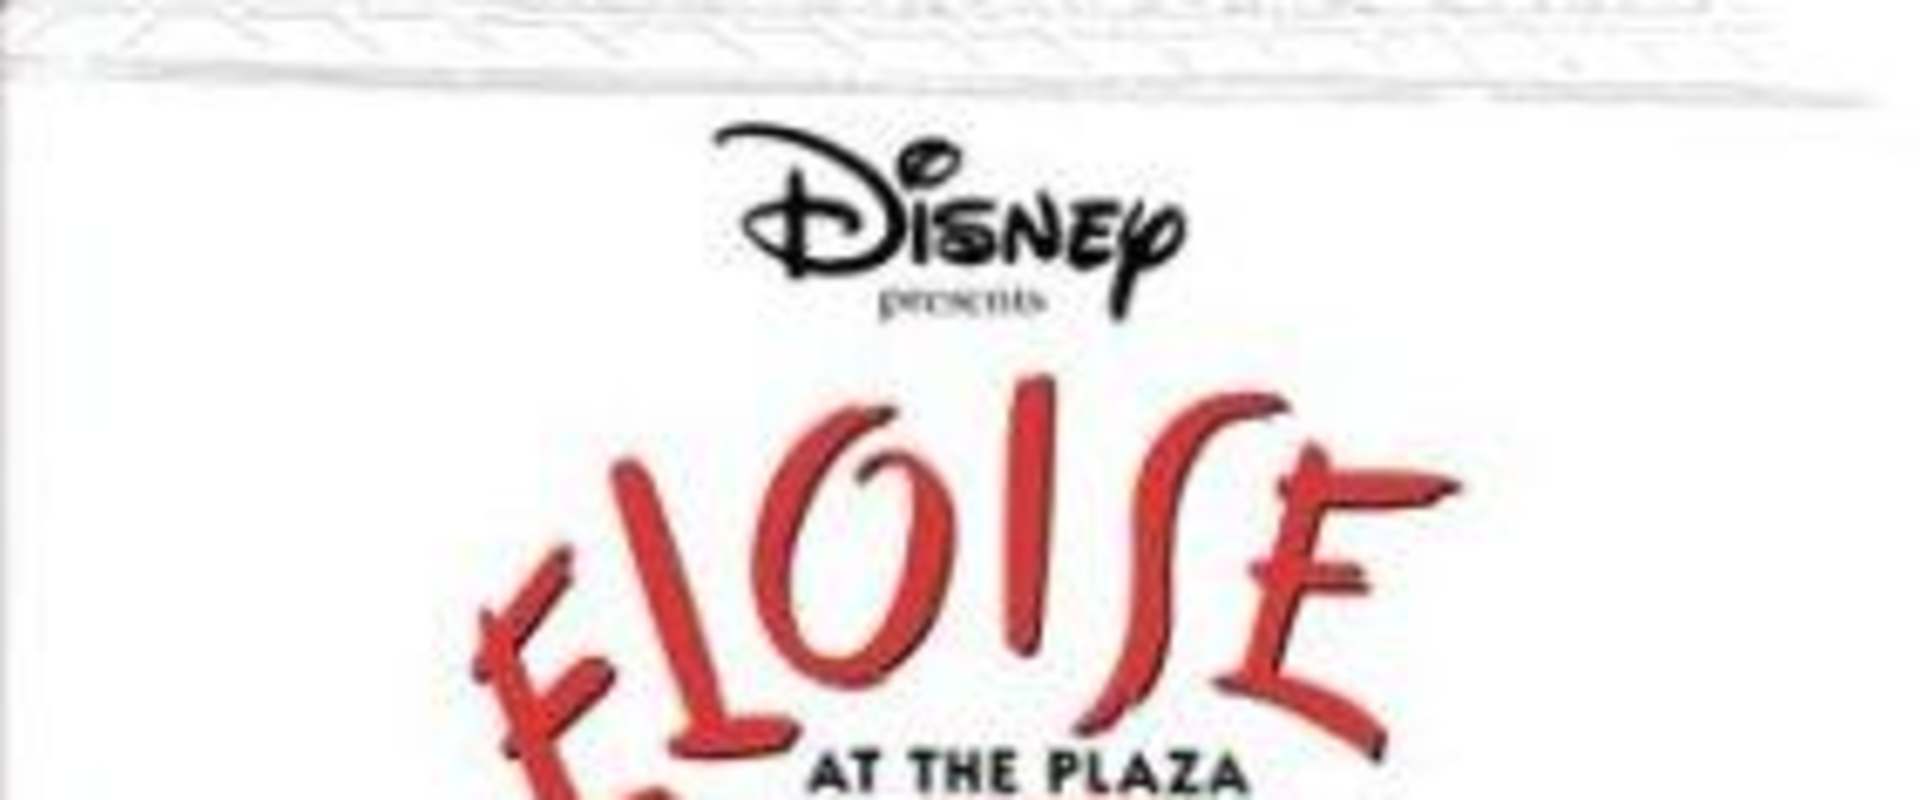 Eloise at the Plaza background 2